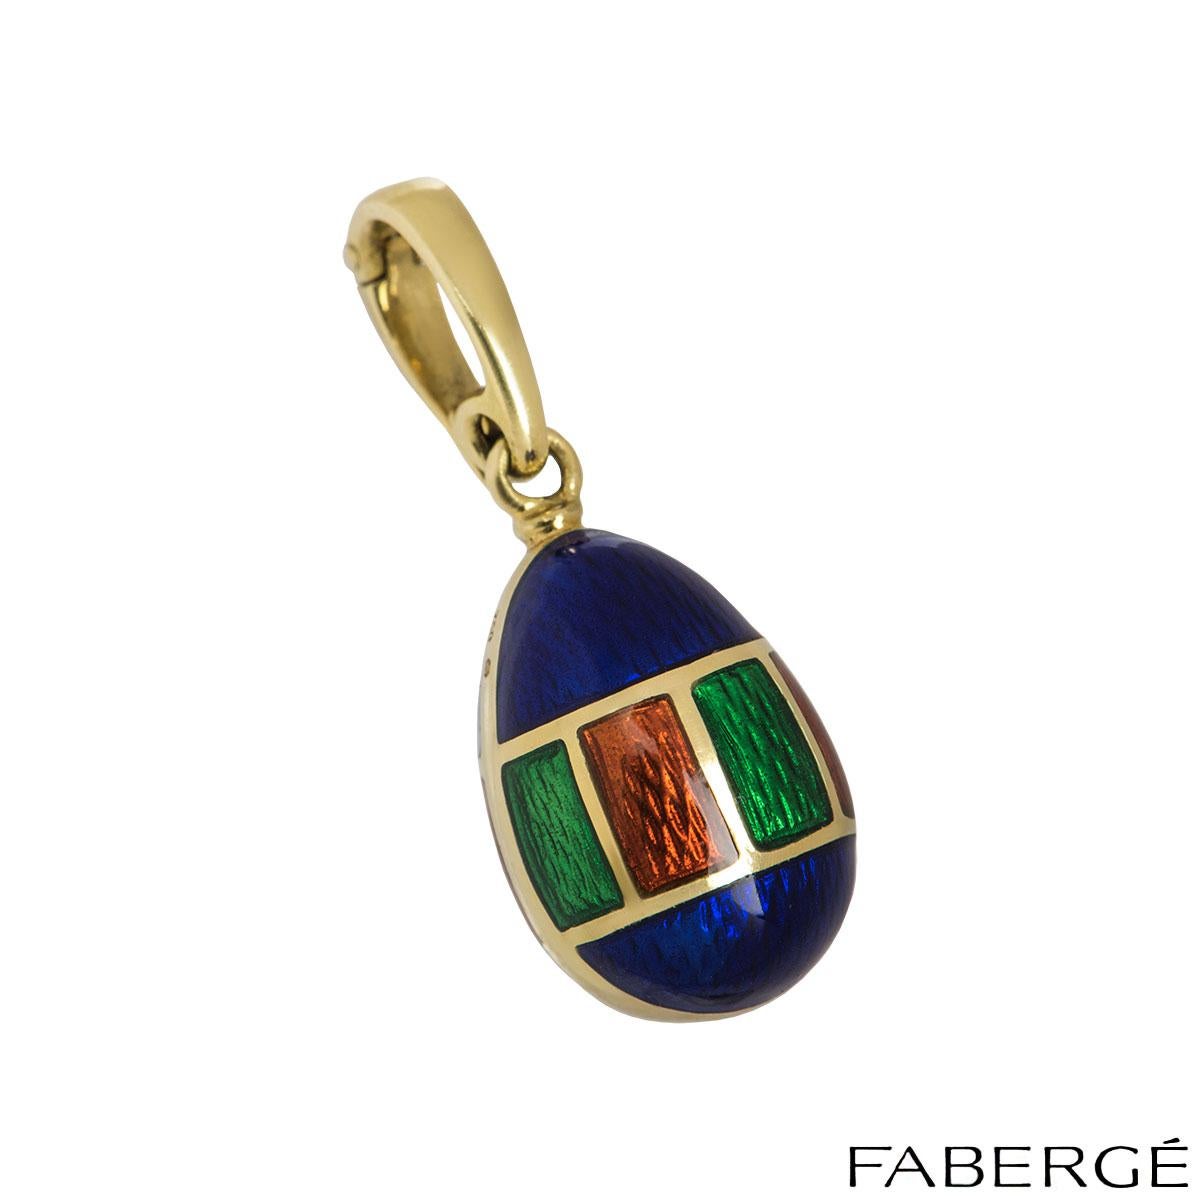 An 18k yellow gold egg charm by Faberge from the Victor Mayer collection. The egg charm features blue, green and red painted enamel alternating in shapes. The charm features a loop bail with a gross weight of 7.40 grams

This Limited Edition piece,